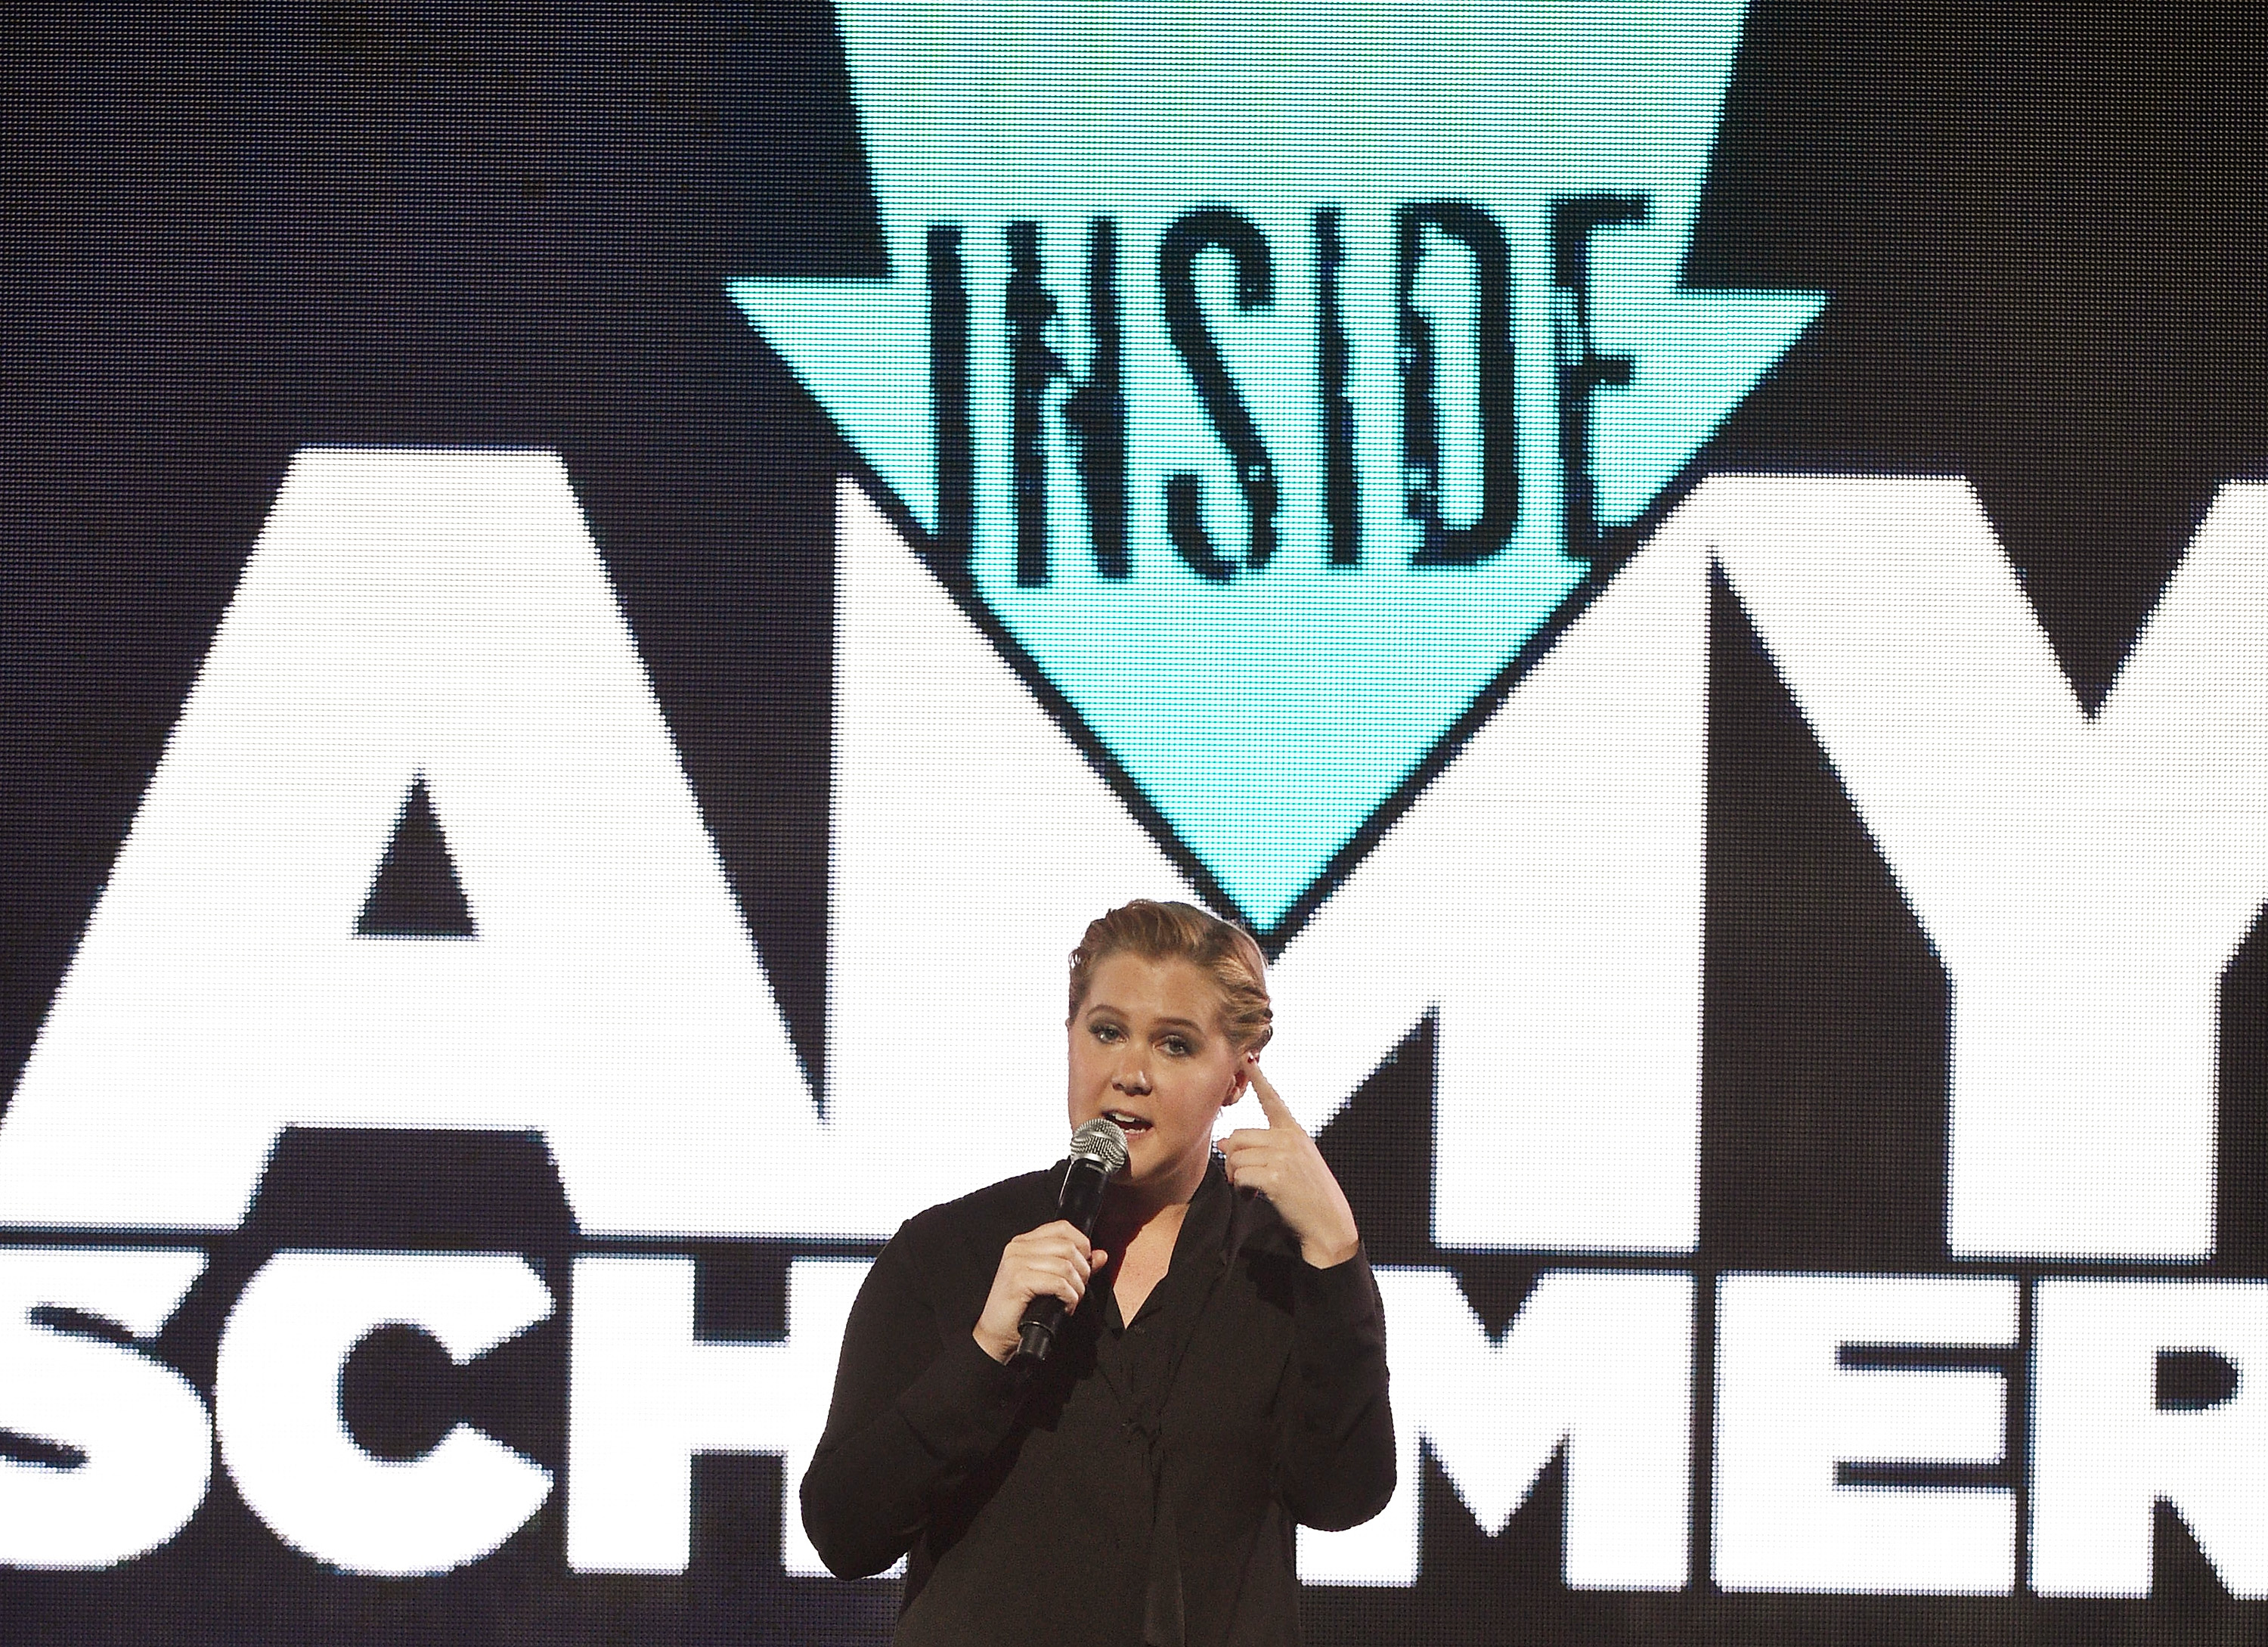 Comedian Amy Schumer speaks onstage during the Comedy Central Live 2016 upfront at Town Hall on March 31, 2016 in New York City.  (Photo by Bryan Bedder/Getty Images for Comedy Central) (Bryan Bedder—Getty Images for Comedy Central)